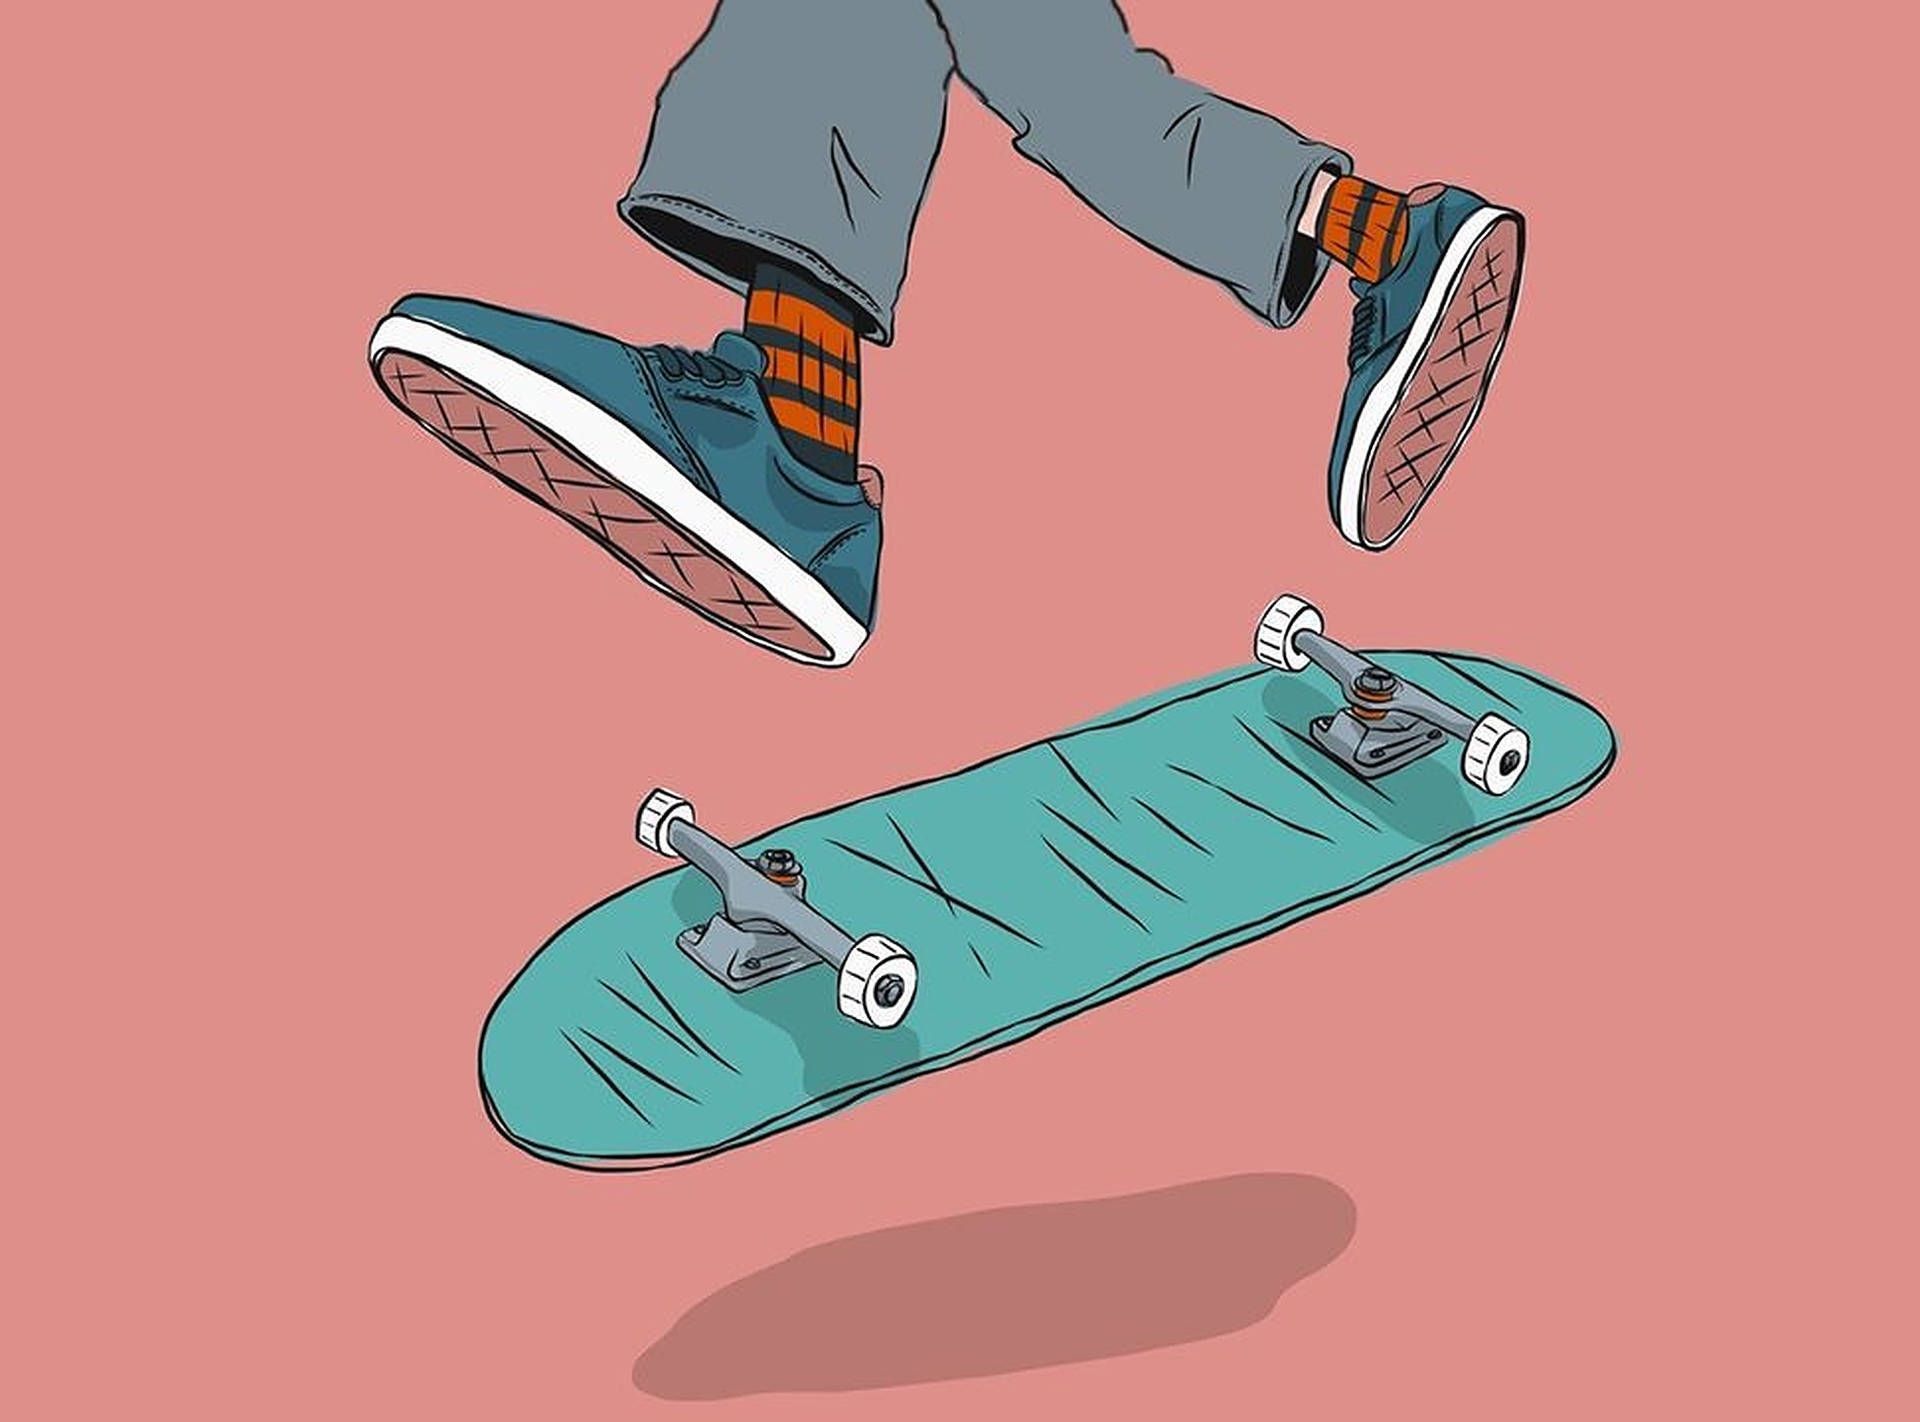 A person is jumping on top of their skateboard - Skate, skater